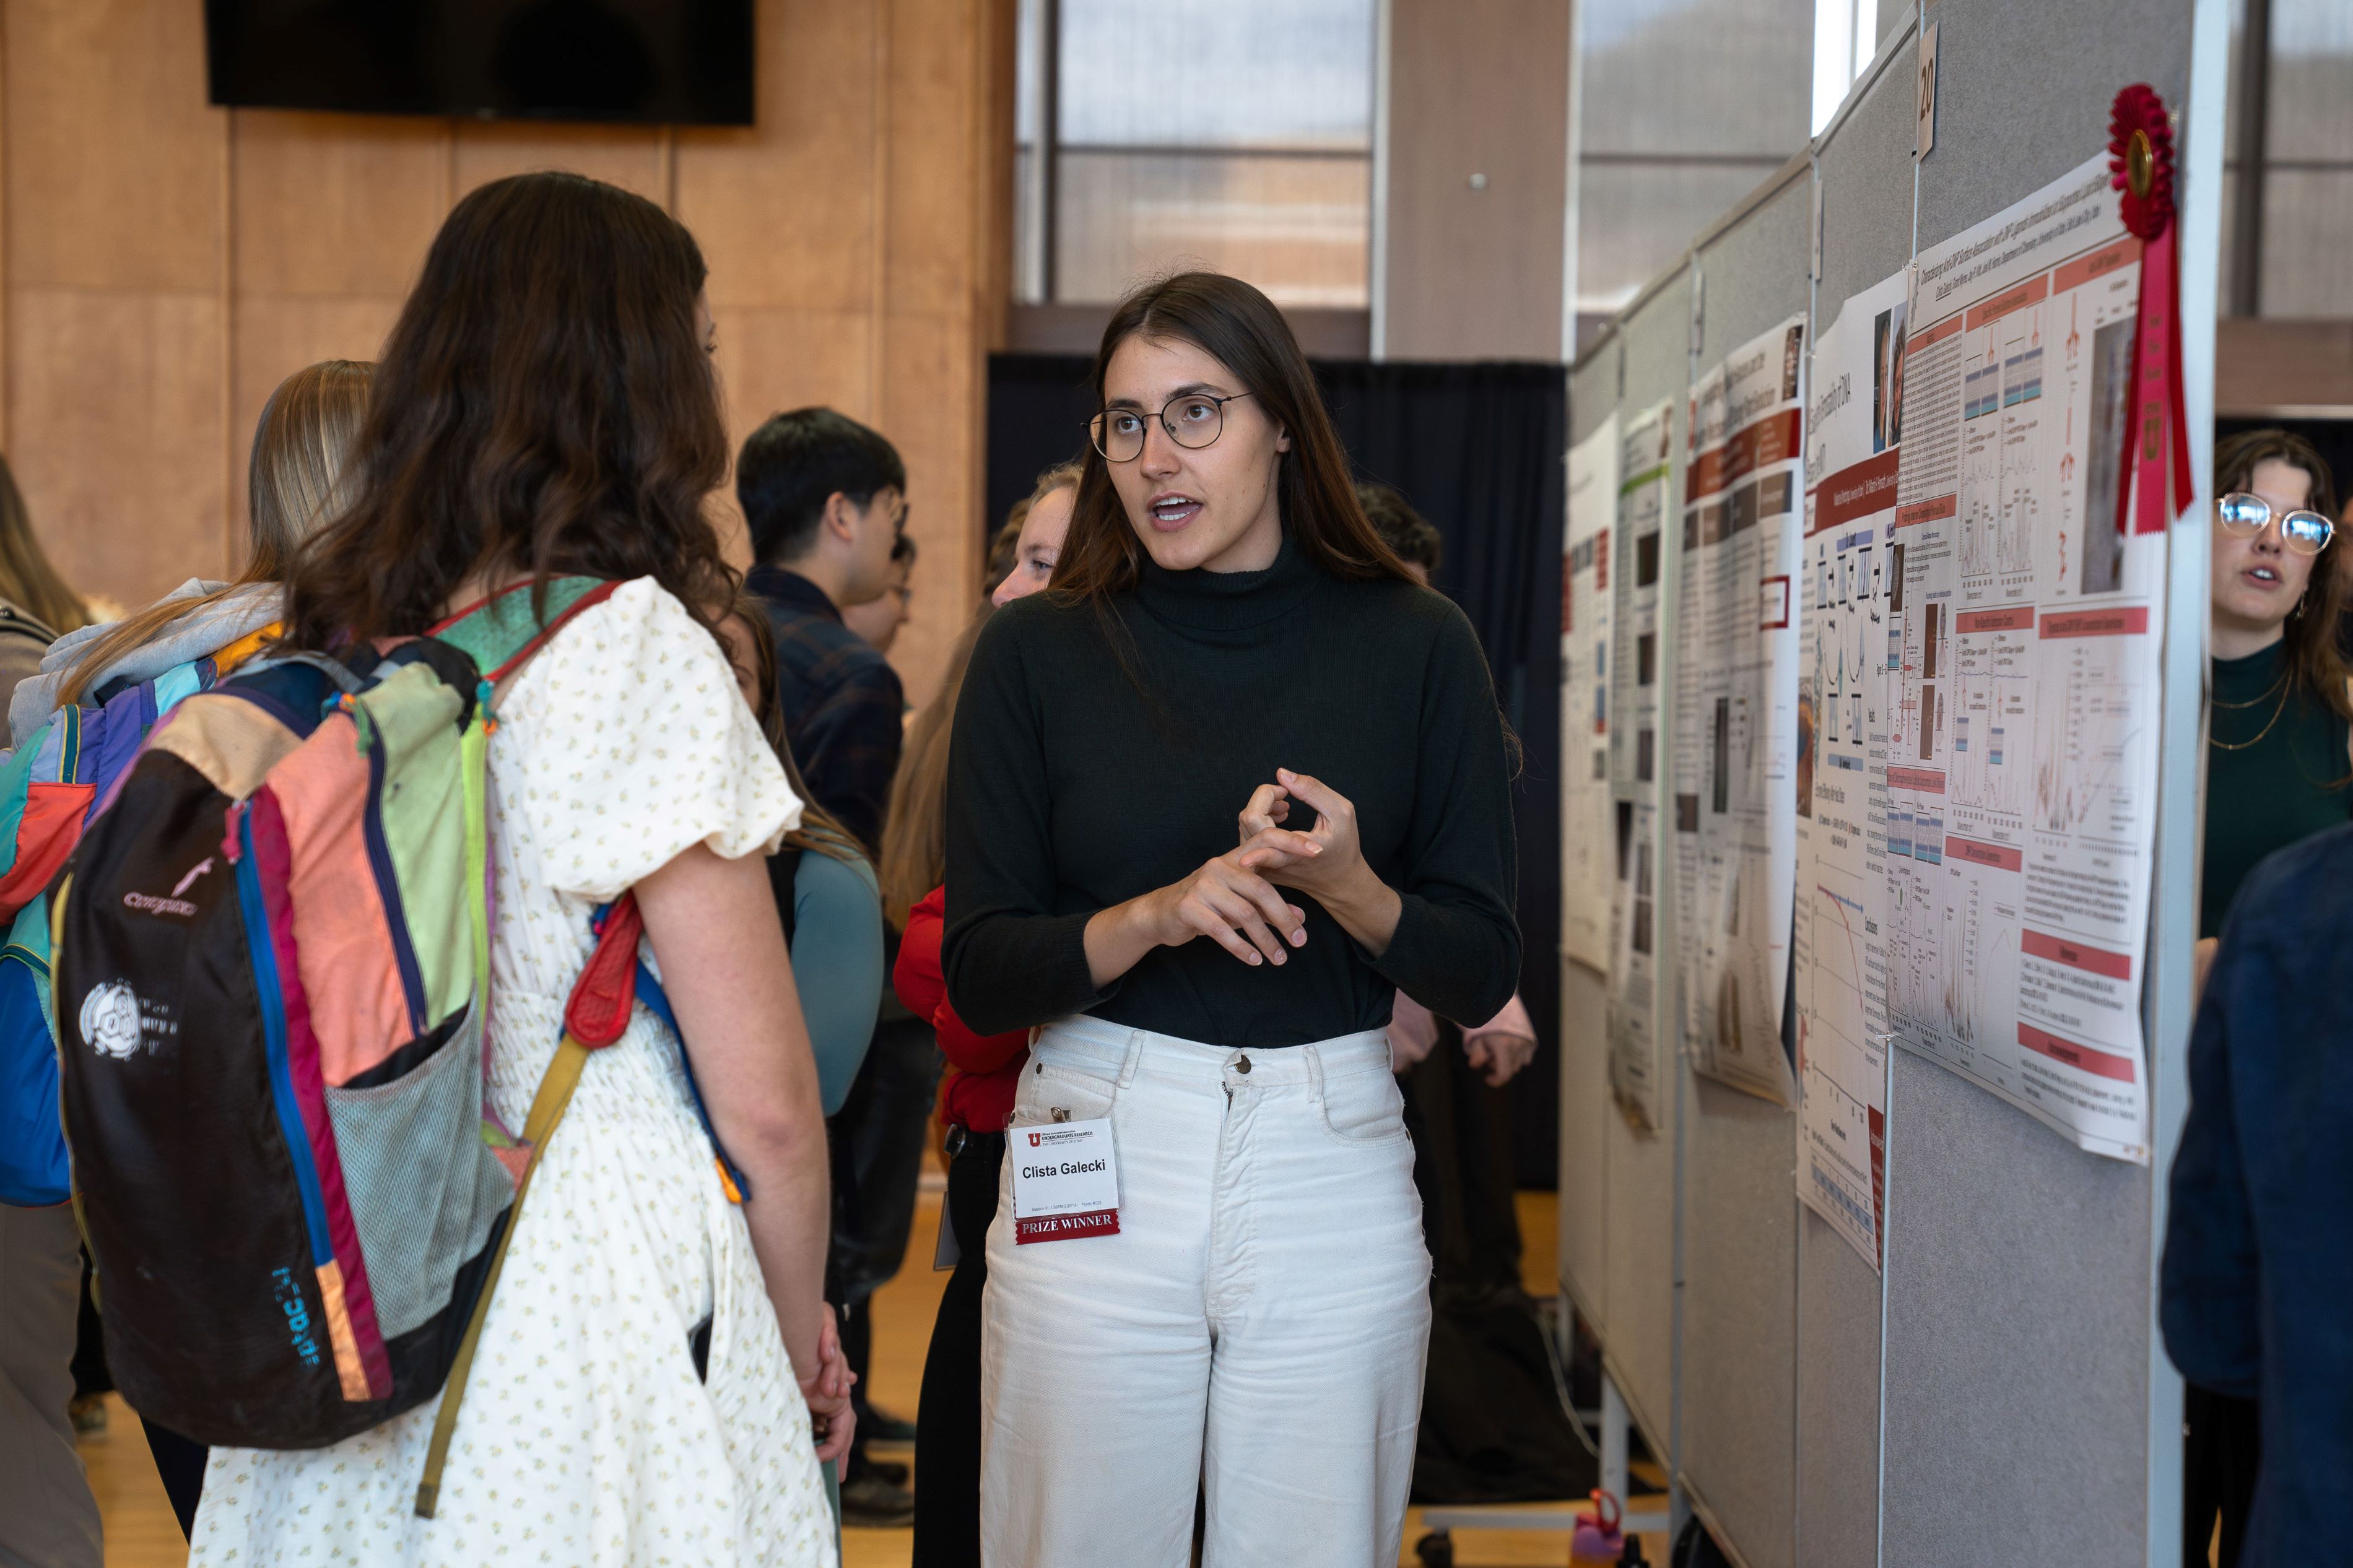 Clista presents her research at the OUR Symposium, winning a best-poster award!